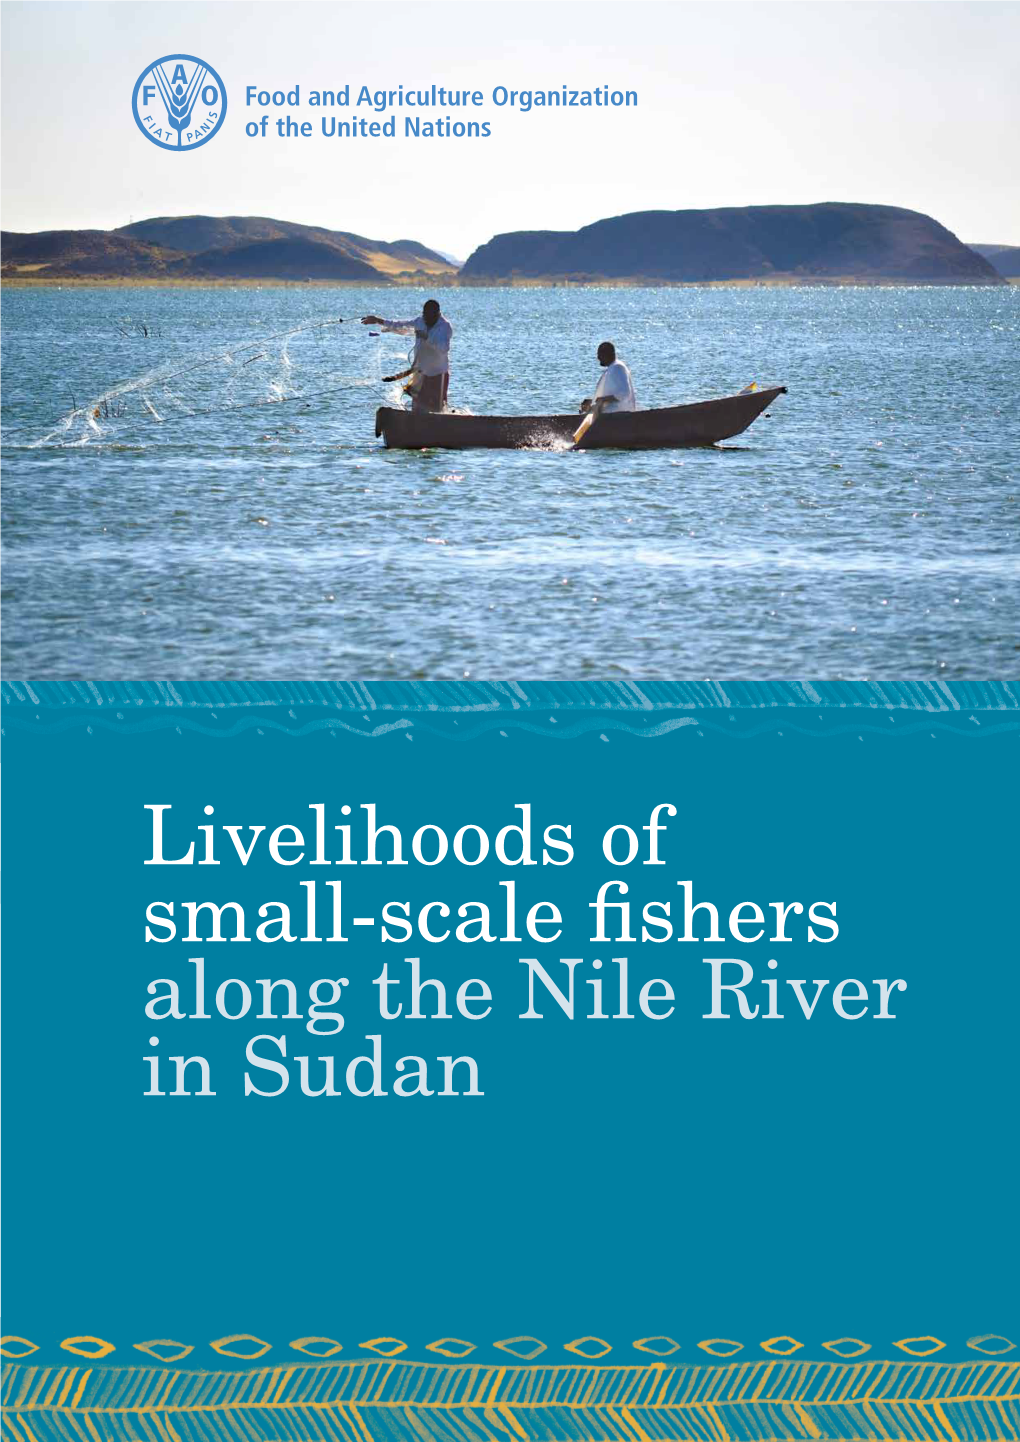 Small Scale Fishers Livelihoods Along the Nile River in Sudan”